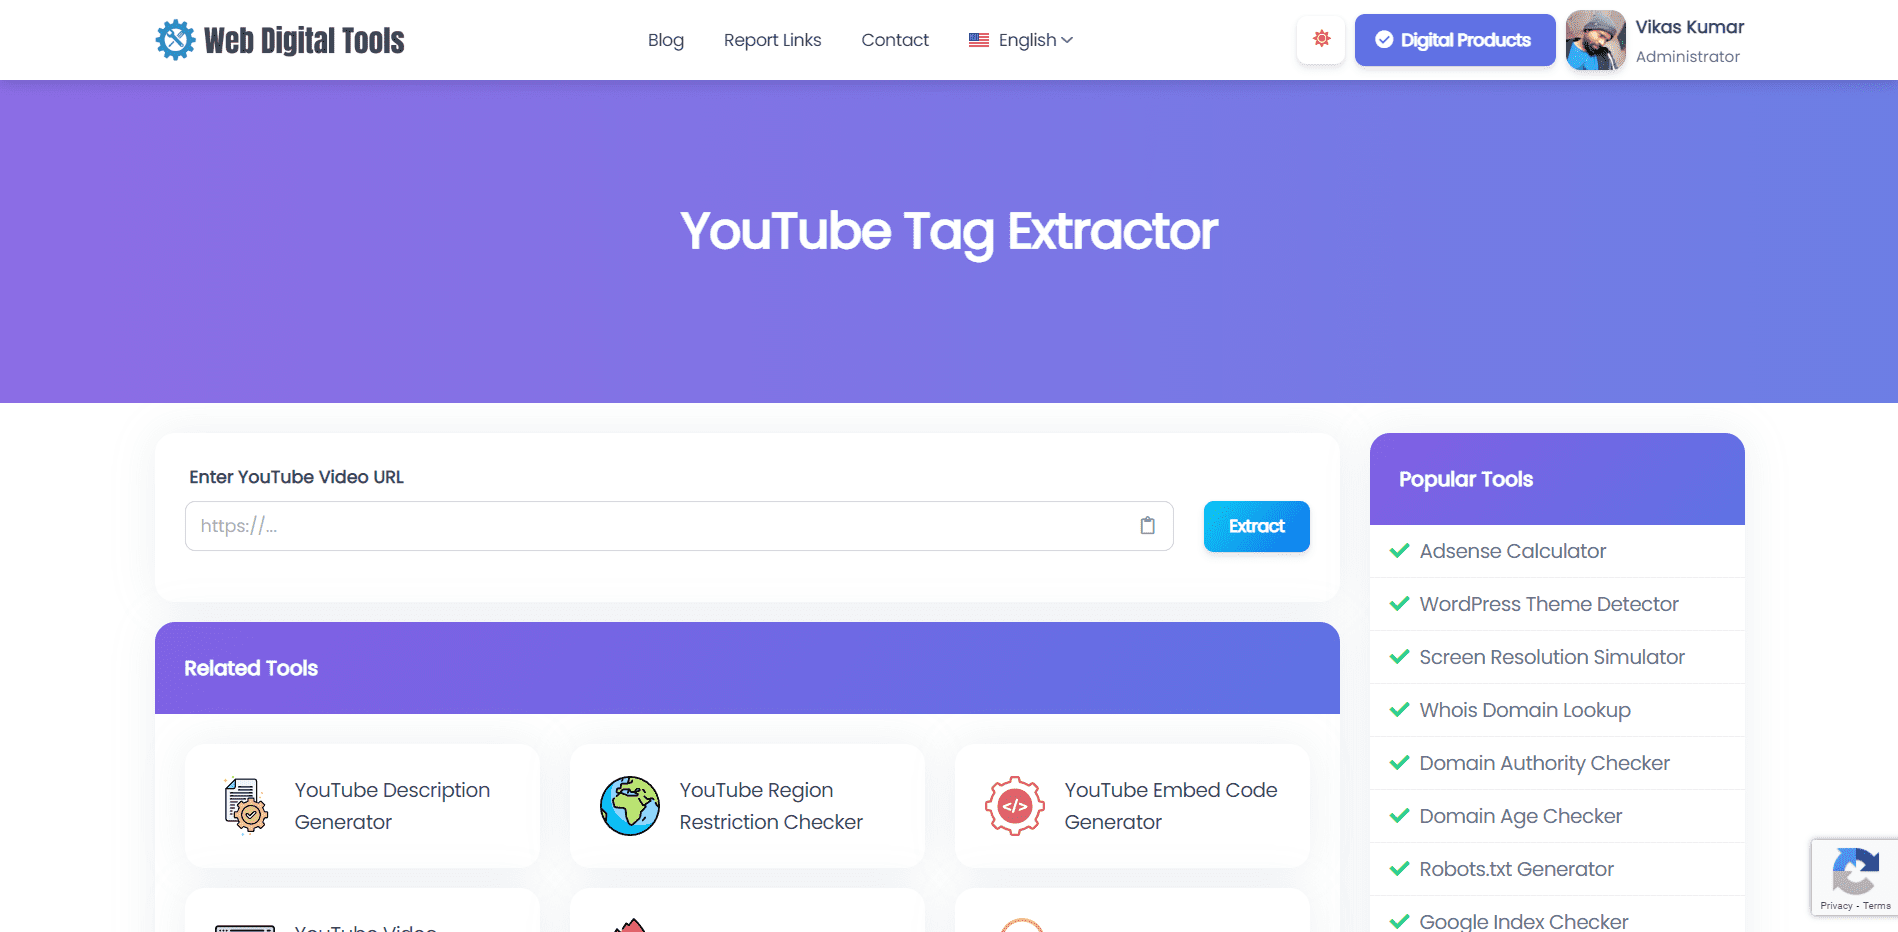 YouTube Tag Extractor